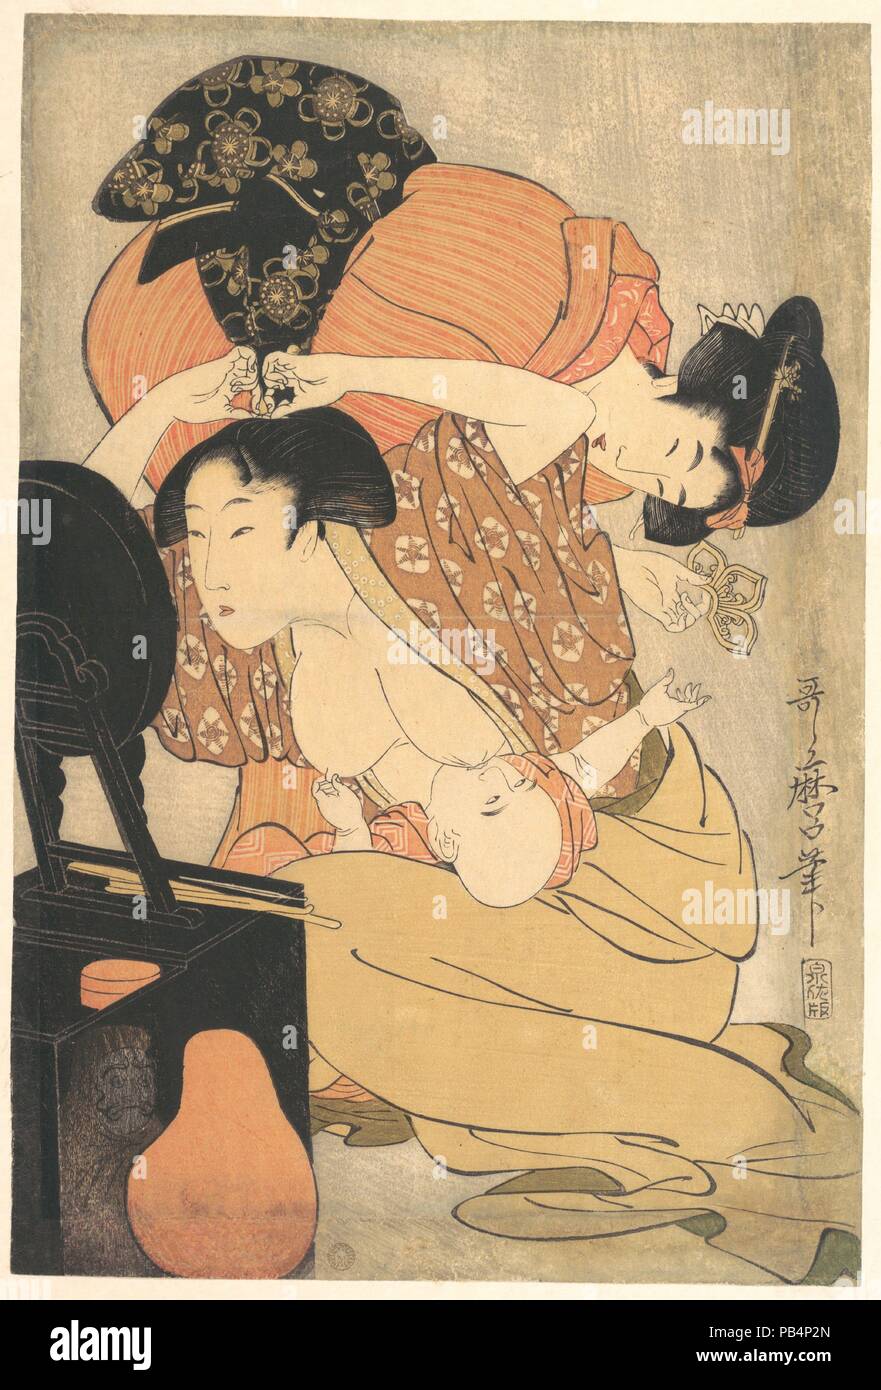 Mother and Child. Artist: Kitagawa Utamaro (Japanese, ca. 1754-1806). Culture: Japan. Dimensions: H. 14 5/8 in. (37.1 cm); W. 10 in. (25.4 cm). Date: ca. 1793.  Utamaro composed this two image with considerable skill and humor, creating a circular movement through gazes and gestures. The mother and child are simultaneously involved in multiple activities. The mother arranges her coiffure before a mirror stand and nurses her baby, while he suckles, pinches her other nipple, and reaches for a toy that is offered by another woman. Museum: Metropolitan Museum of Art, New York, USA. Stock Photo